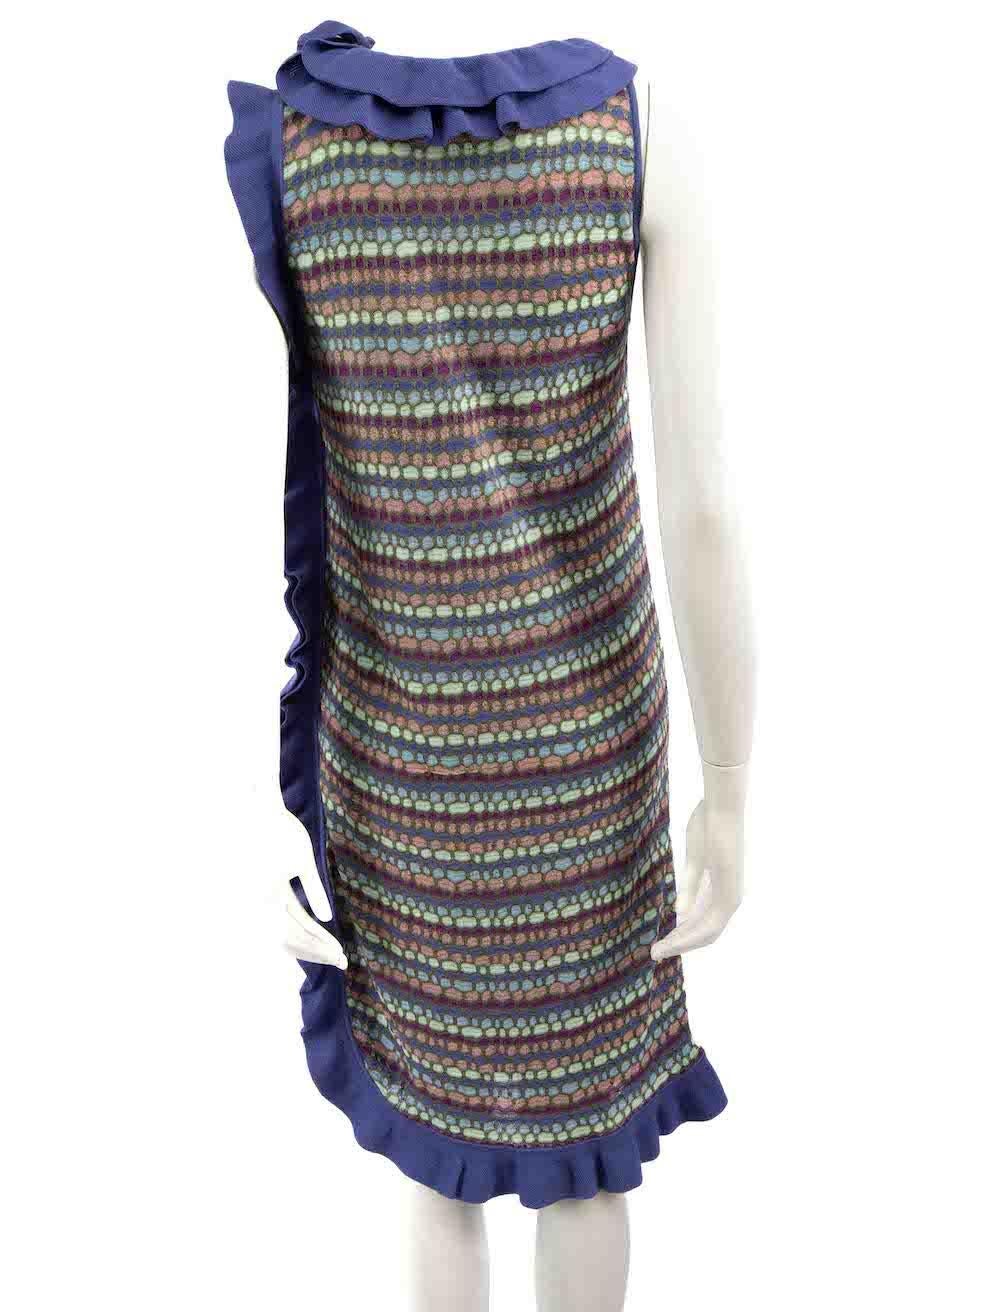 Missoni M Missoni Abstract Pattern Ruffle Trim Knit Dress Size L In Good Condition For Sale In London, GB